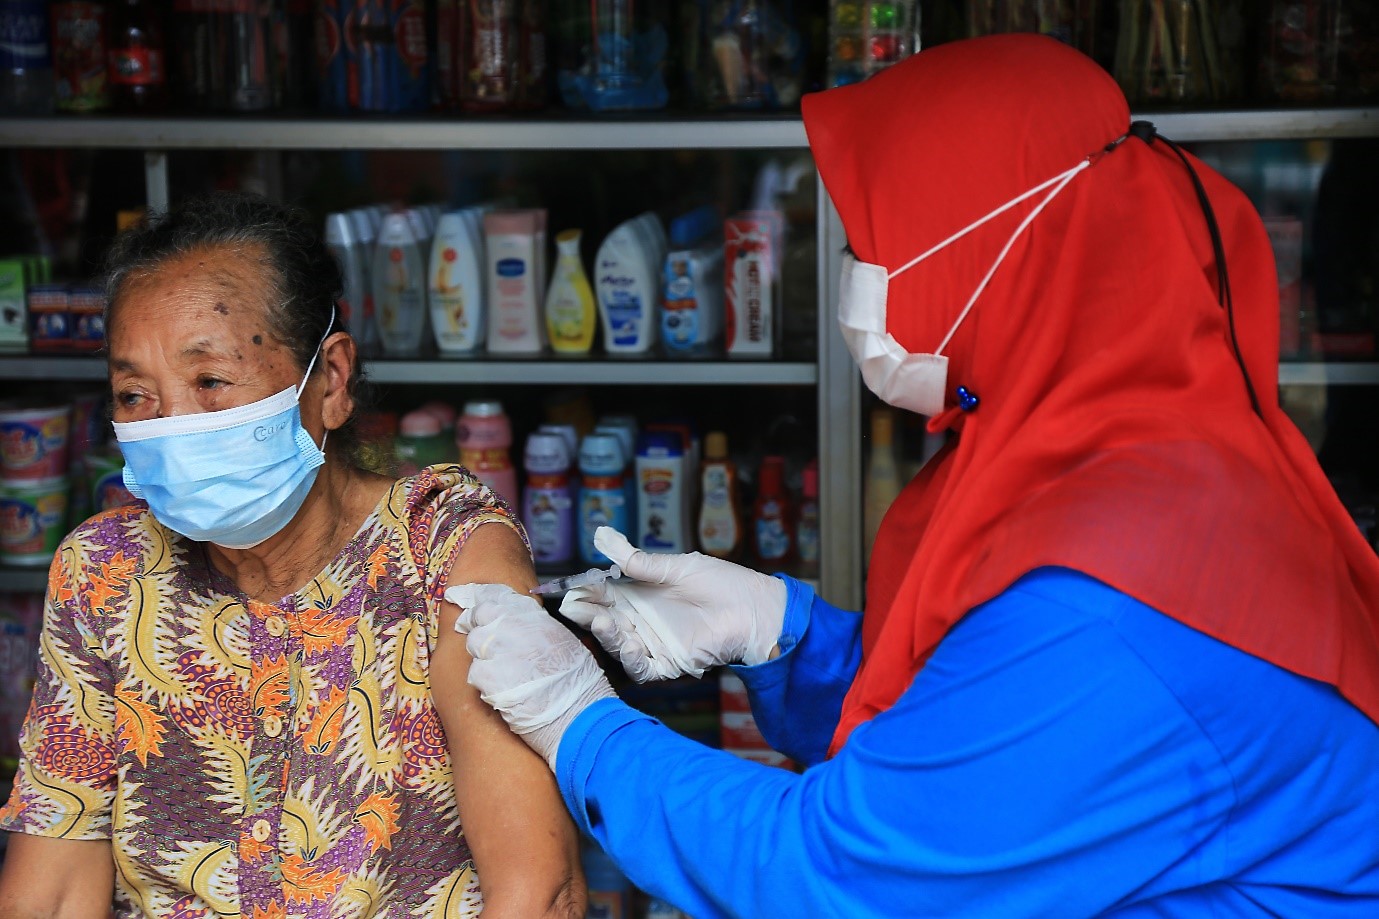 Mbak Mintasih, a resident of Purwokerto Village, receives a COVID-19 vaccination in front of her house from a health worker from the Tayu 2 Health Center (photo by: AIHSP Documentation Team)